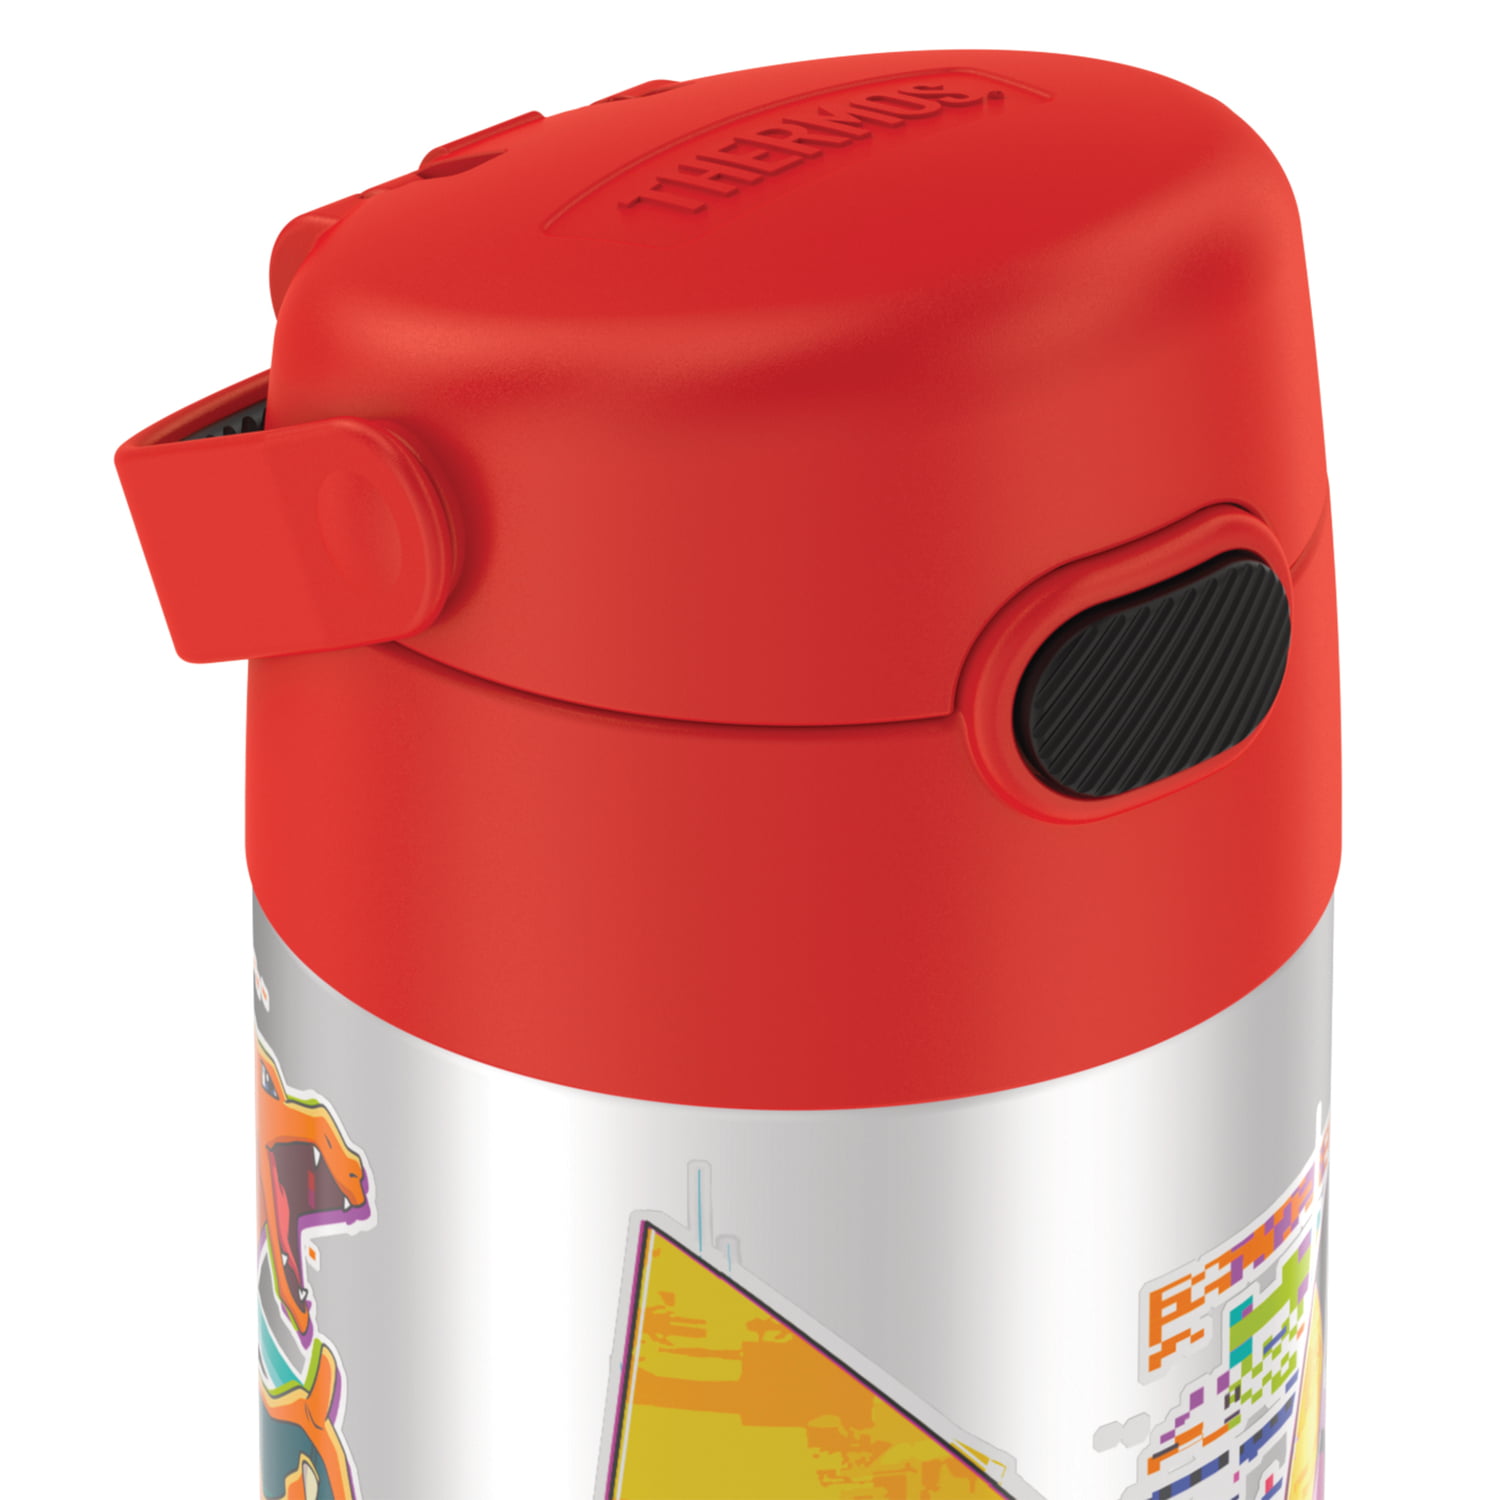 Thermos Funtainer 12-Oz Stainless Steel Vacuum Insulated Straw Bottle ( Pokemon) $11.91 (Reg. $19) - Lowest price in 30 days - Fabulessly Frugal